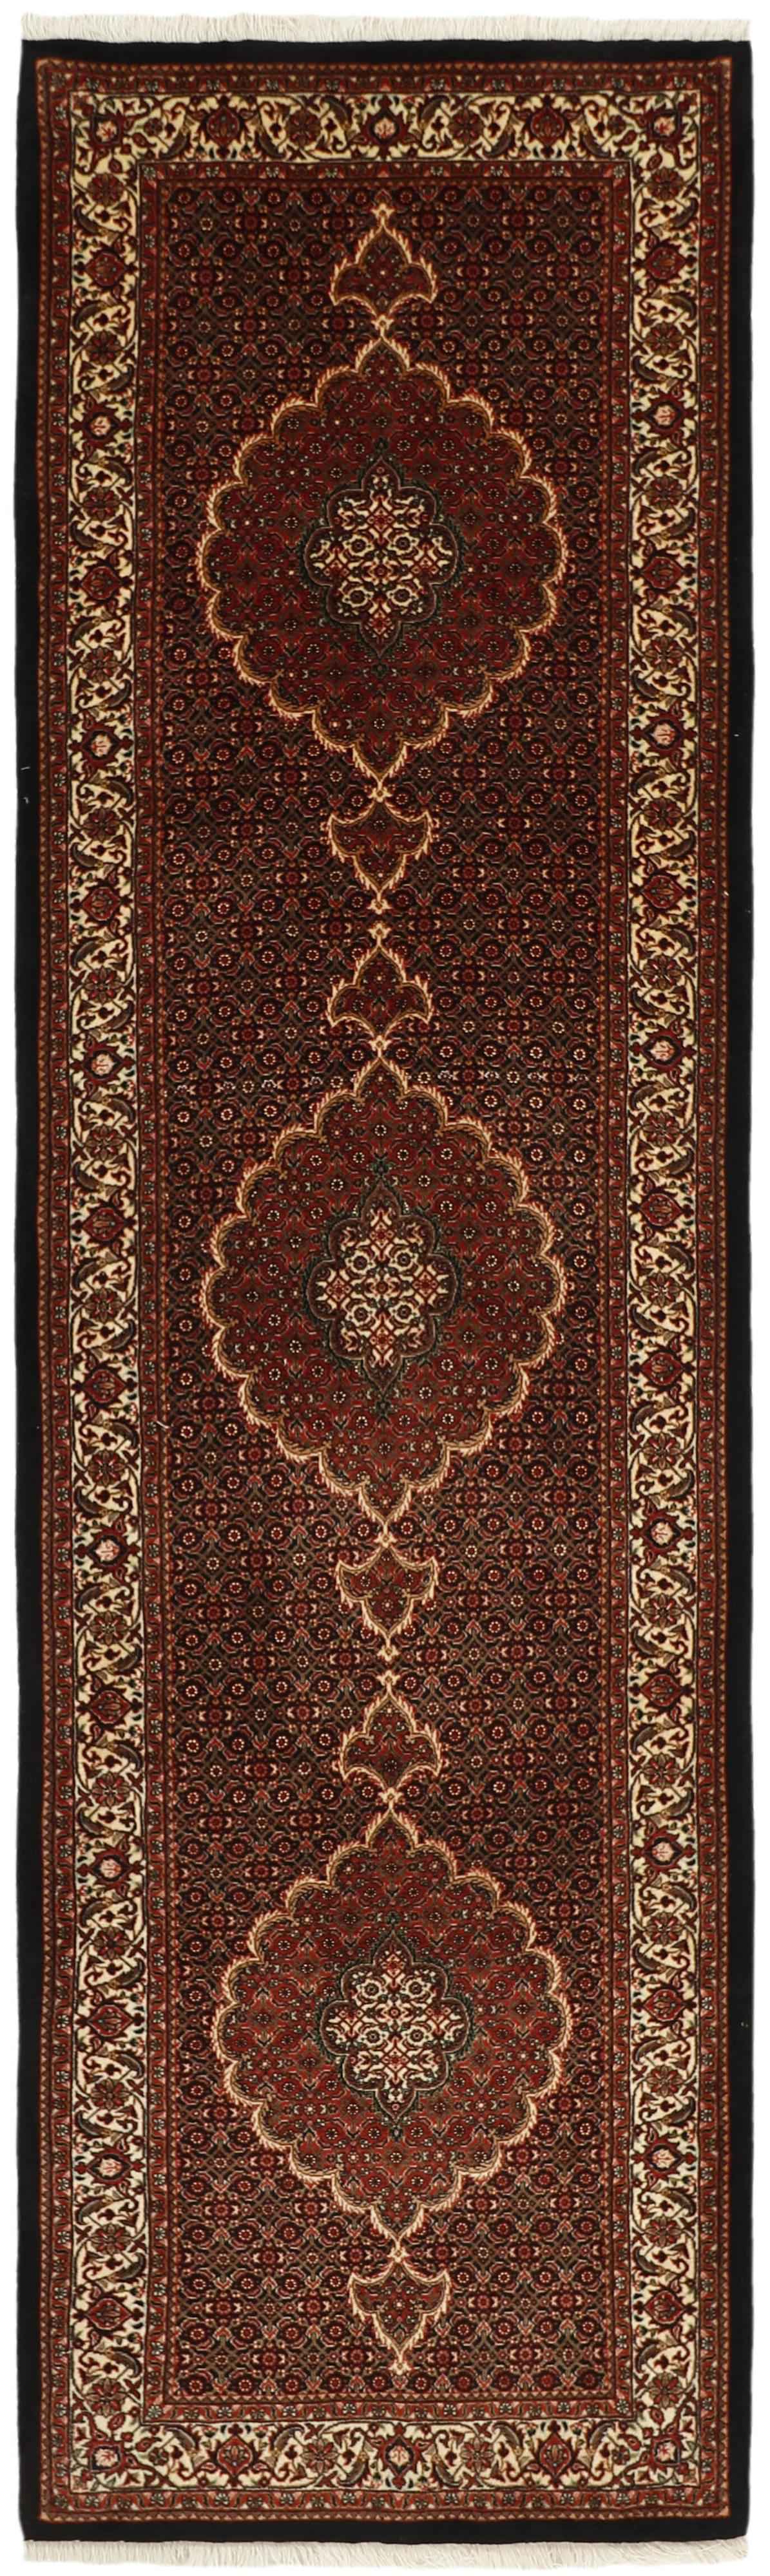 Red and cream persian runner with traditional floral design